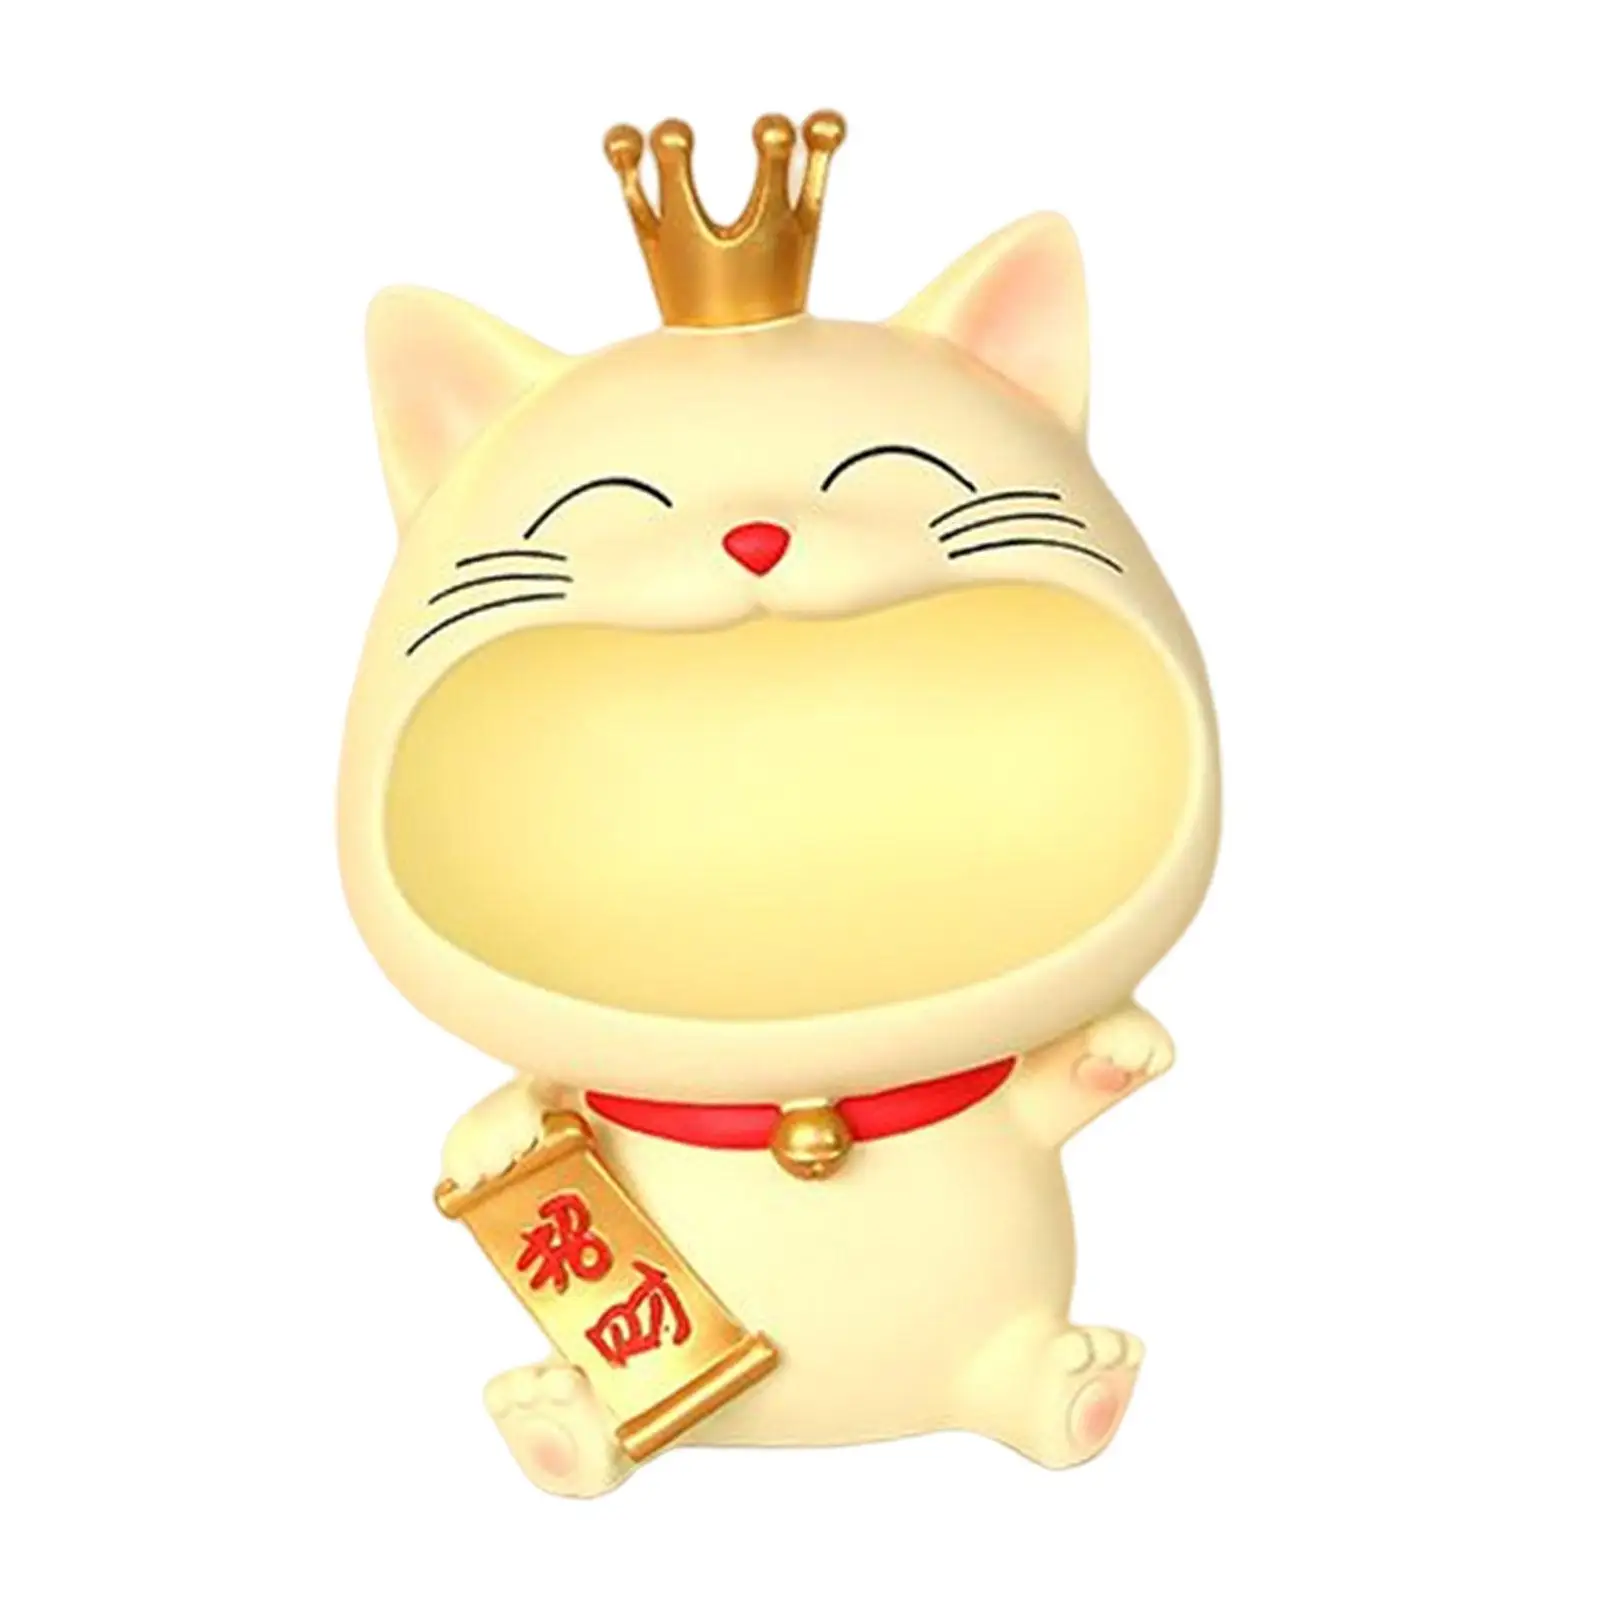 Cat Figurine Storage Box Ornament Creative Resin Sculpture Snack Holder for Living Room Table Home Entryway Decoration